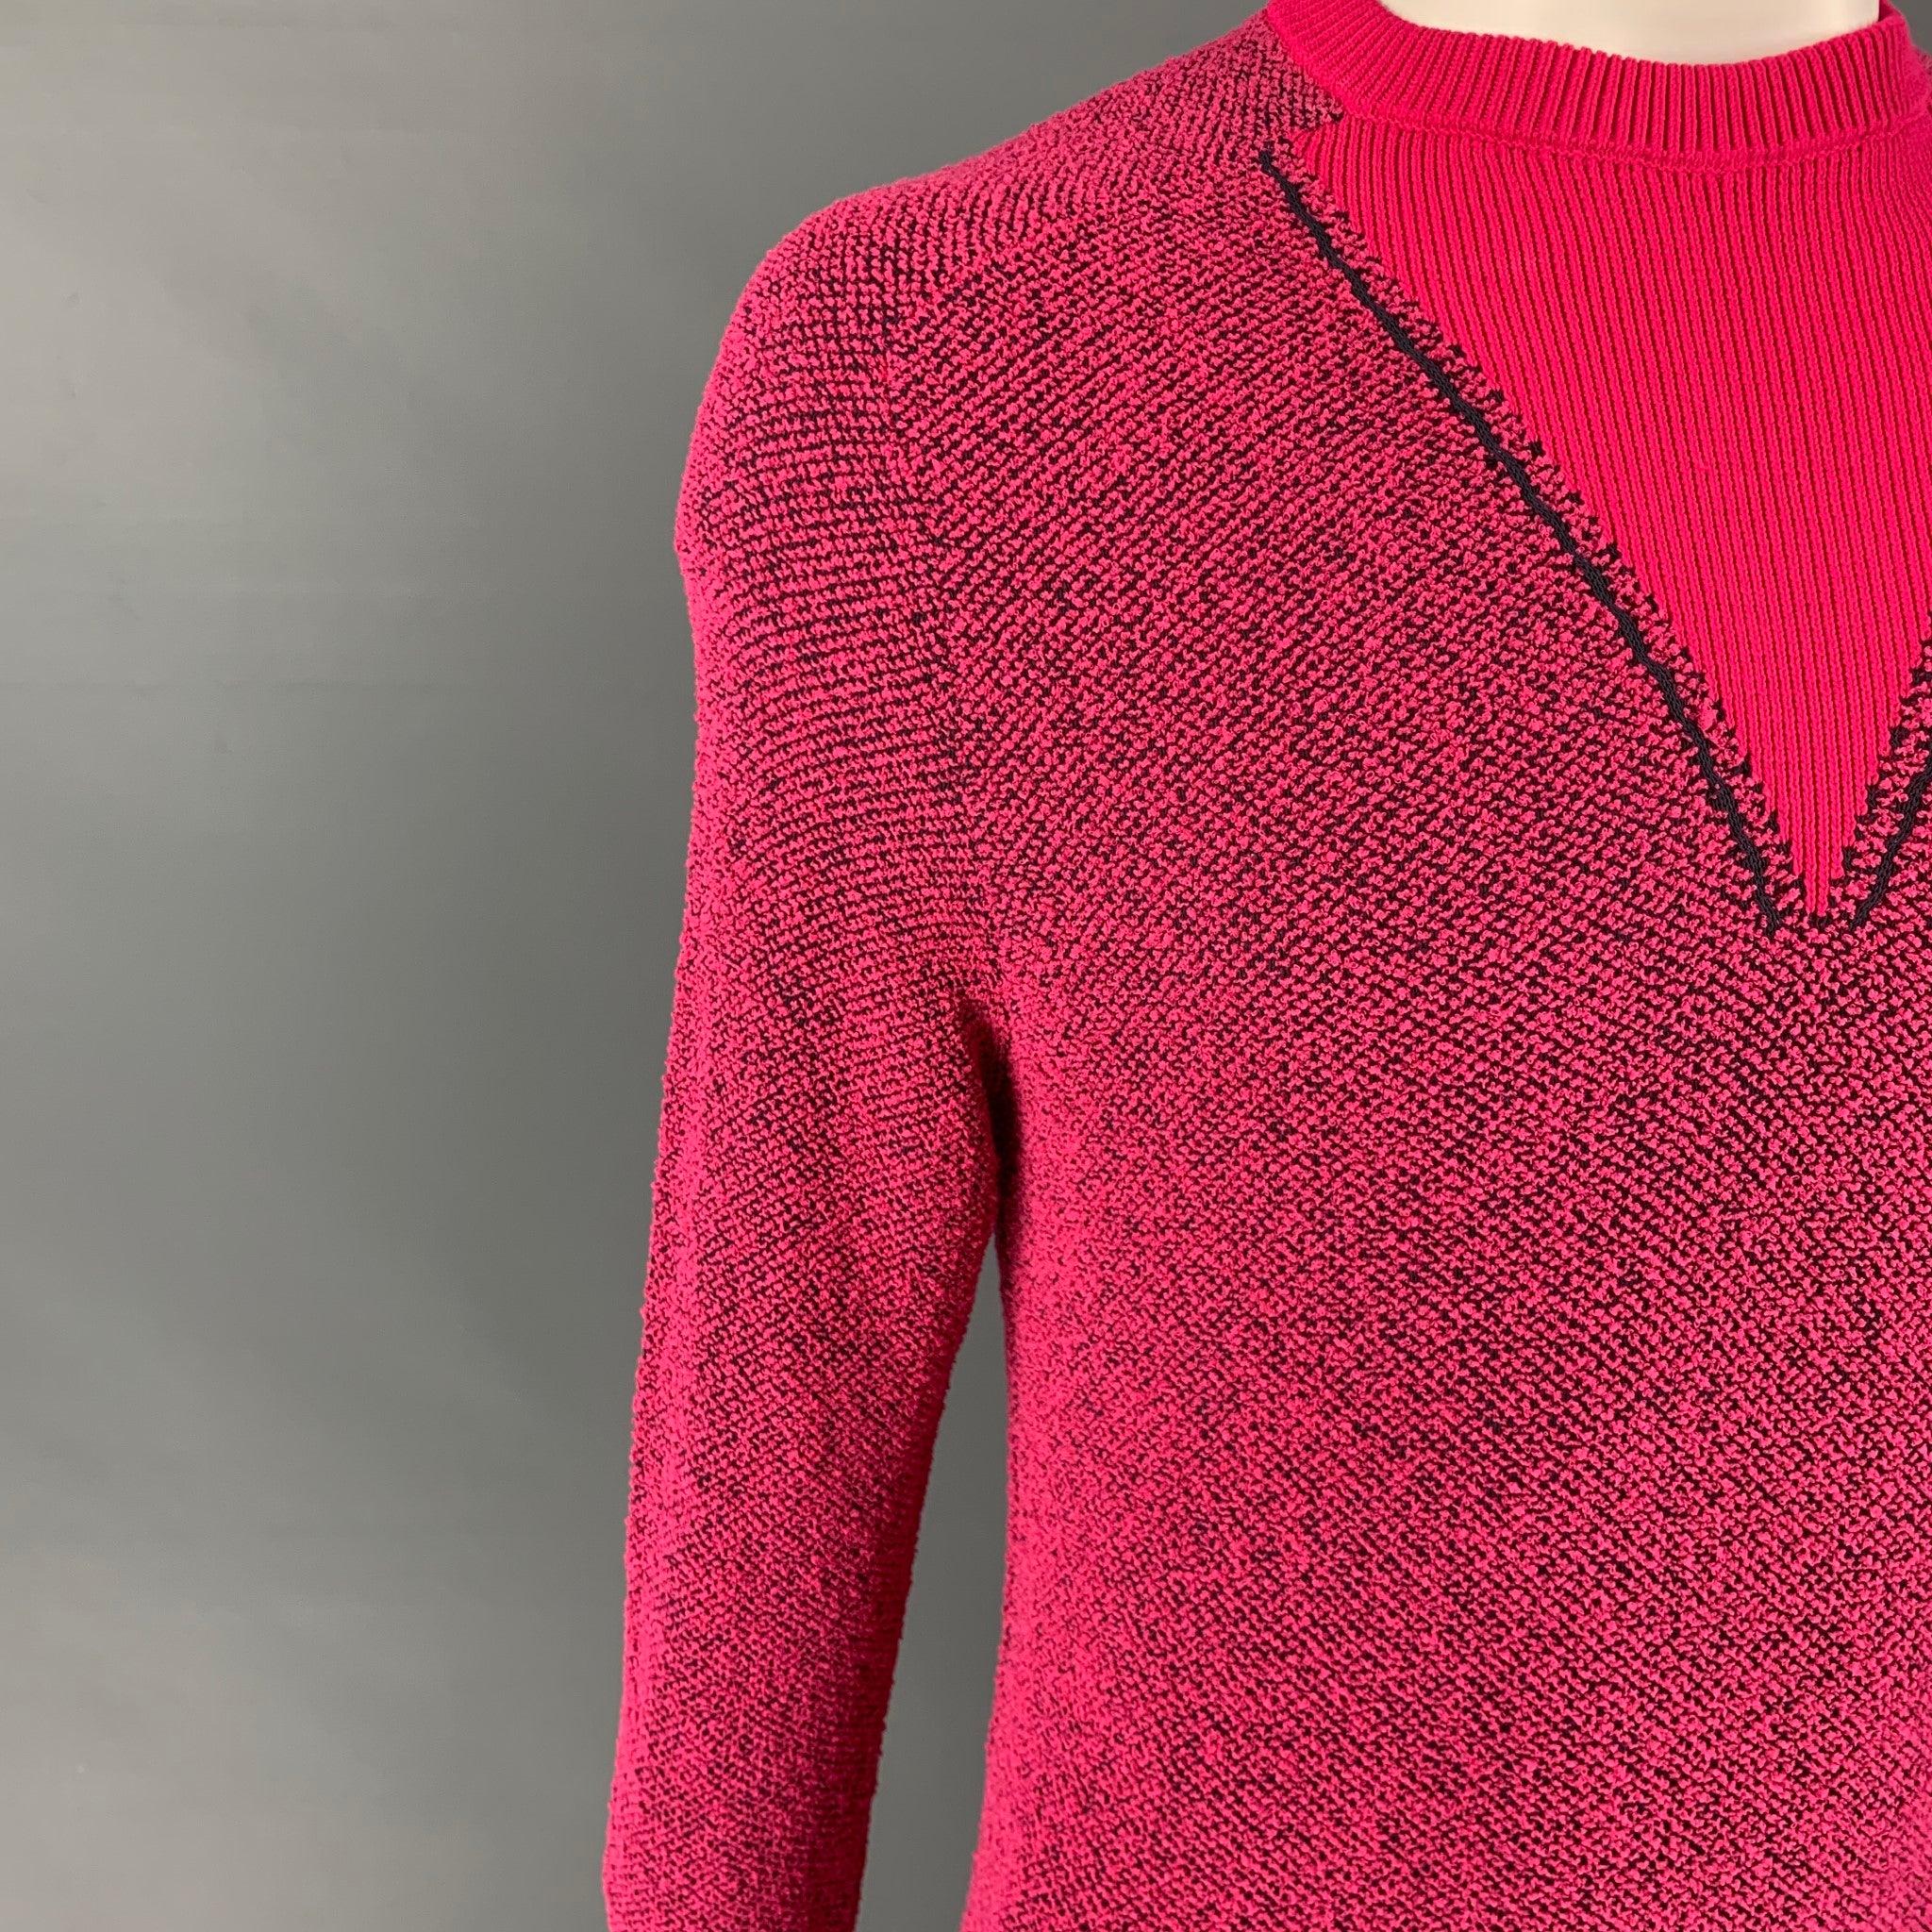 PAUL SMITH pullover comes in a pink & black textured polyamide blend featuring a crew-neck.
New with tags. 

Marked:   L  

Measurements: 
 
Shoulder: 17.5 inches Chest: 40 inches 
Sleeve: 30 inches Length: 25 inches 
  
  
 
Reference: